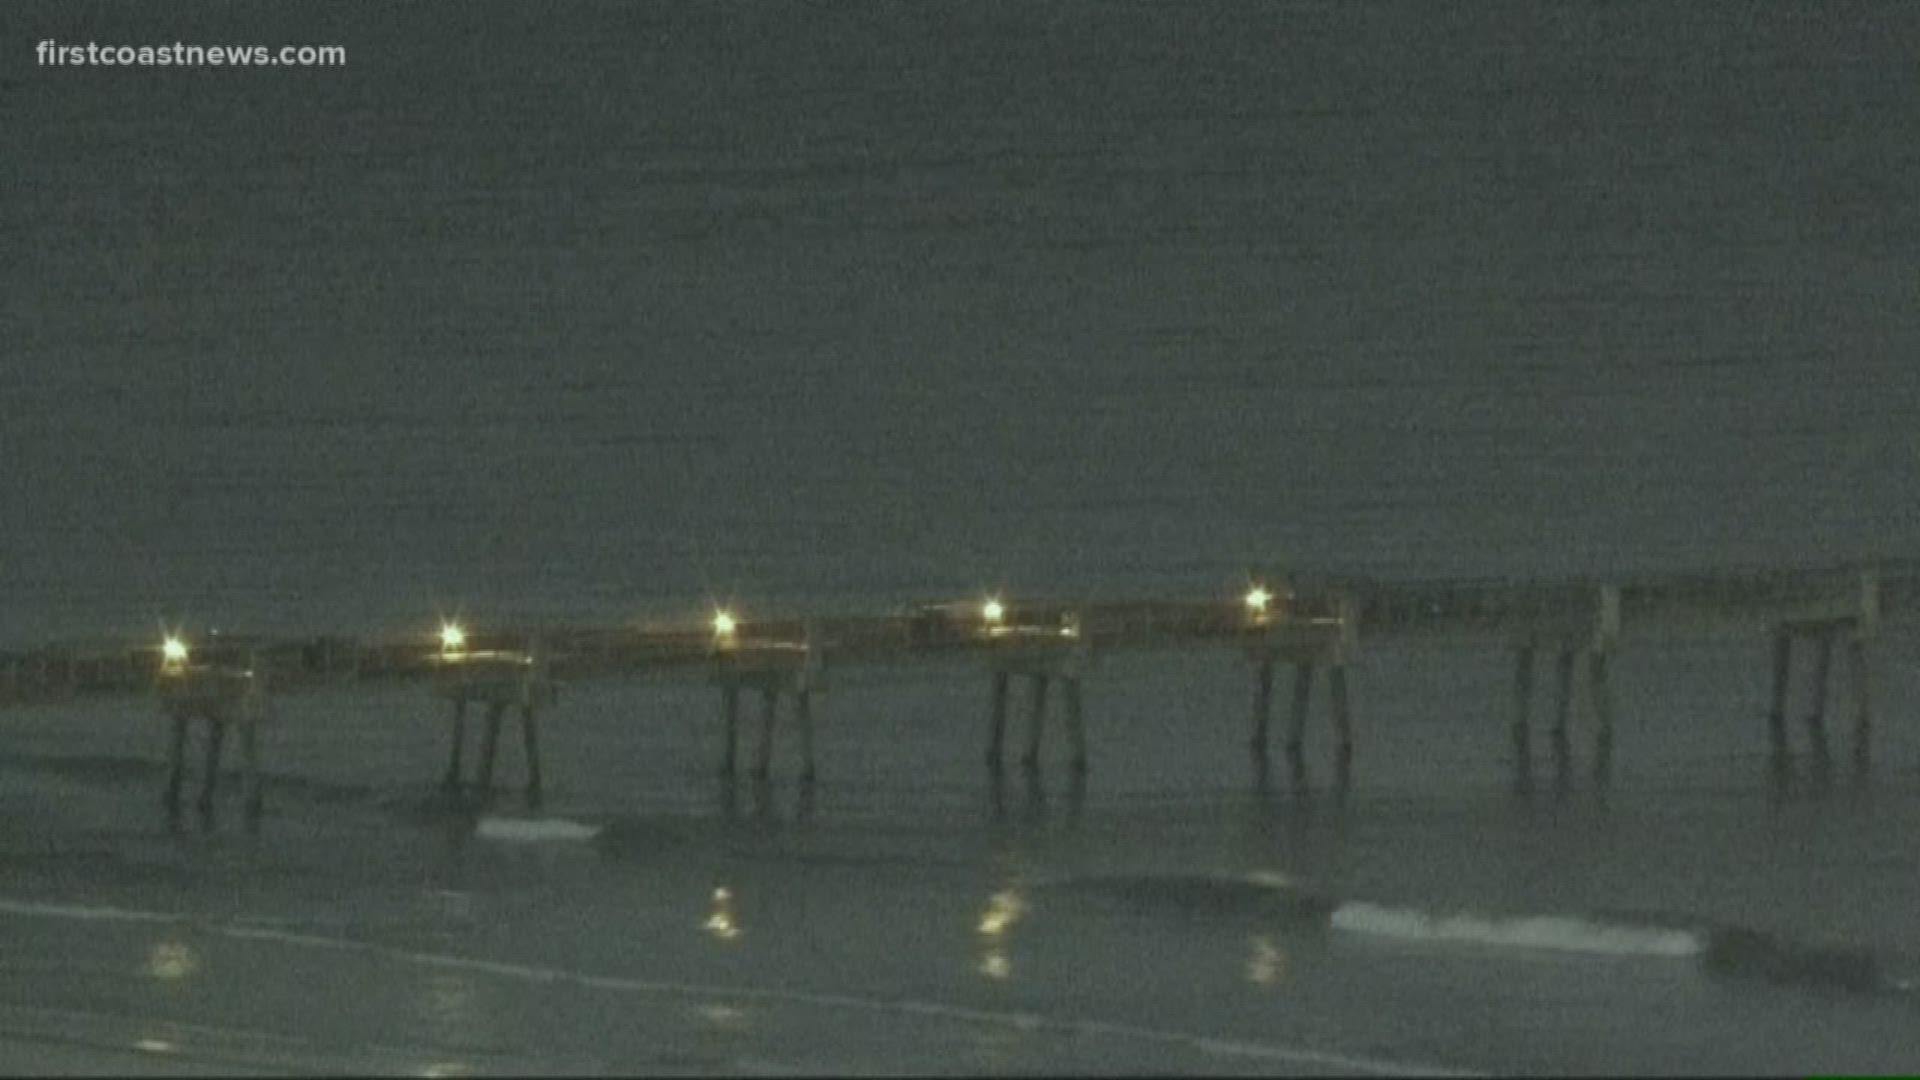 Sunday will be beachgoers' last chance to walk along the Jacksonville Beach Pier due to renovations that are expected to take two years.